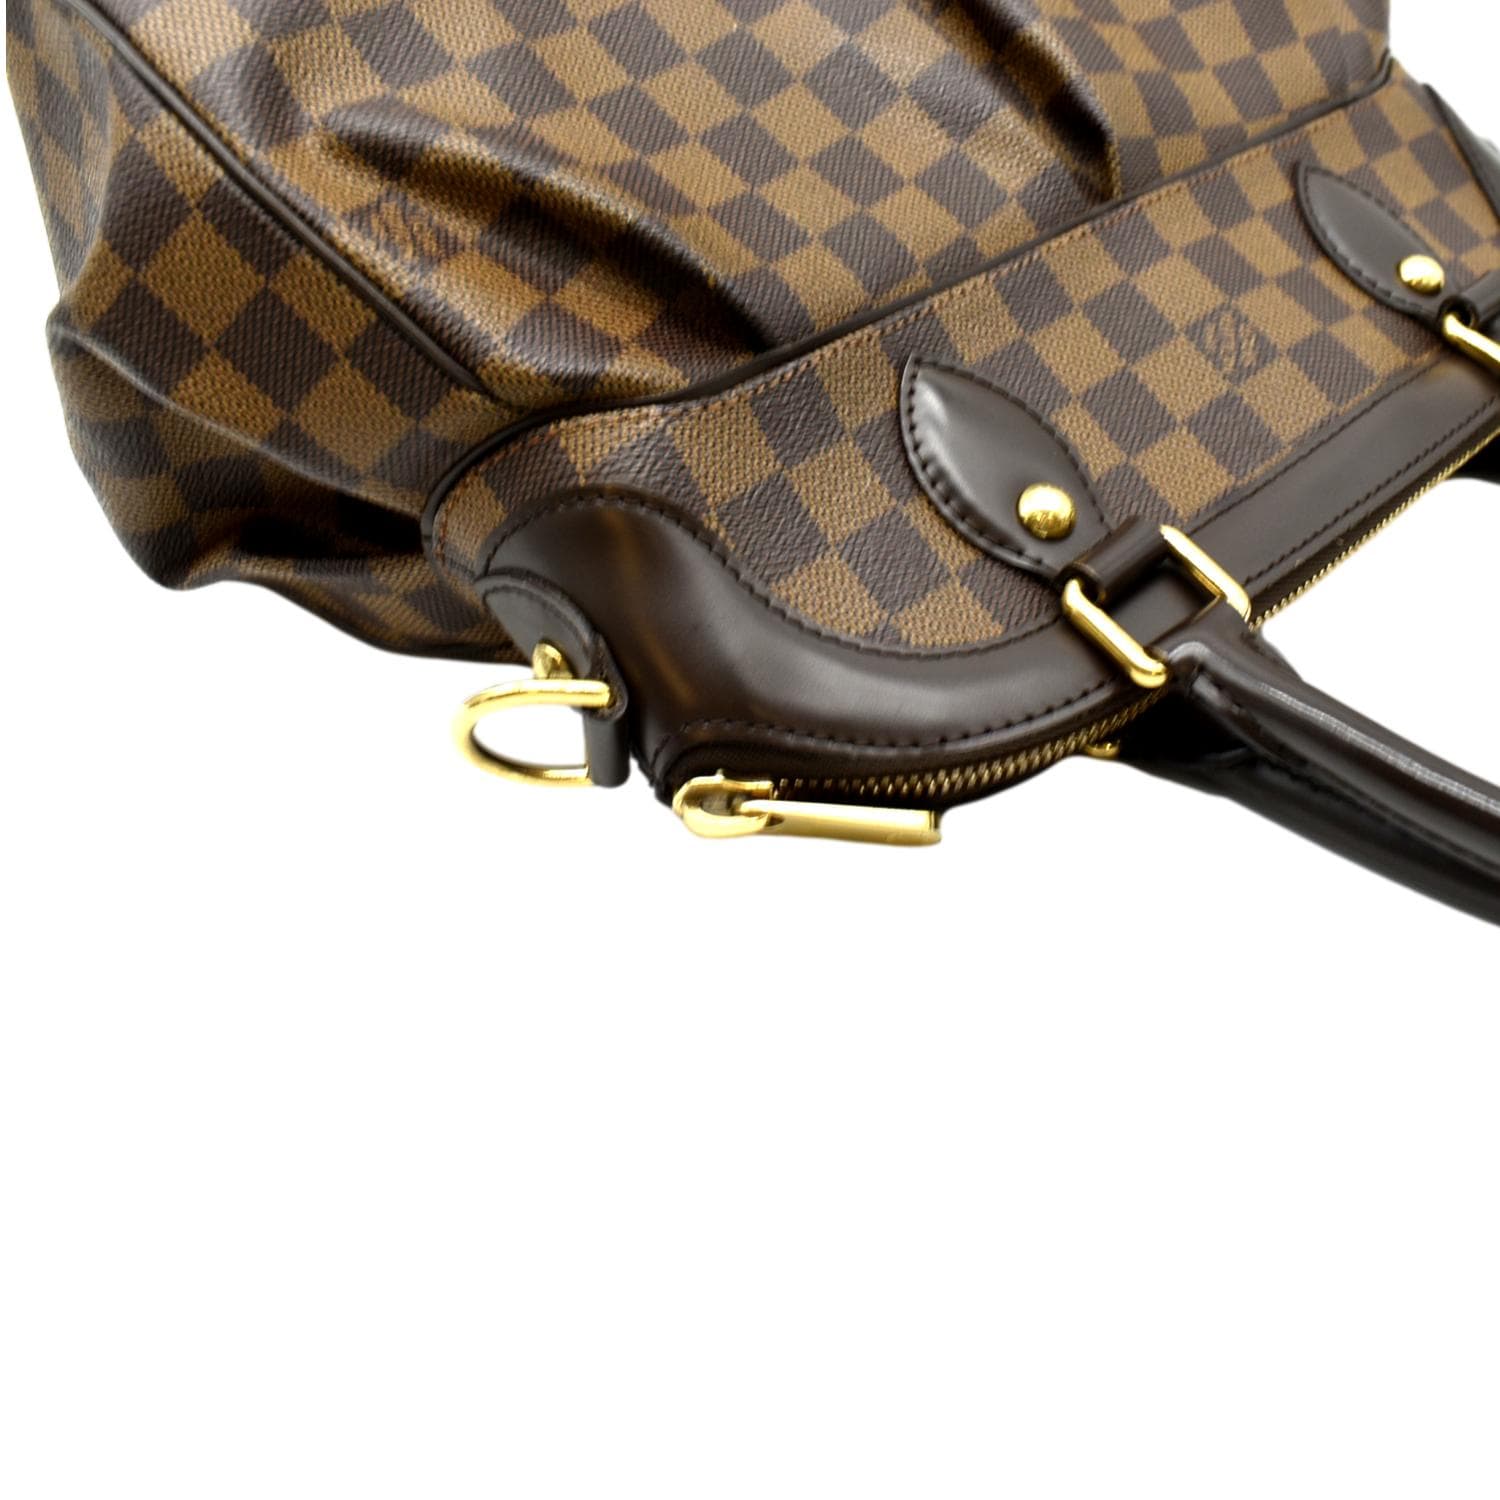 Trevi leather handbag Louis Vuitton Brown in Leather - 28270557